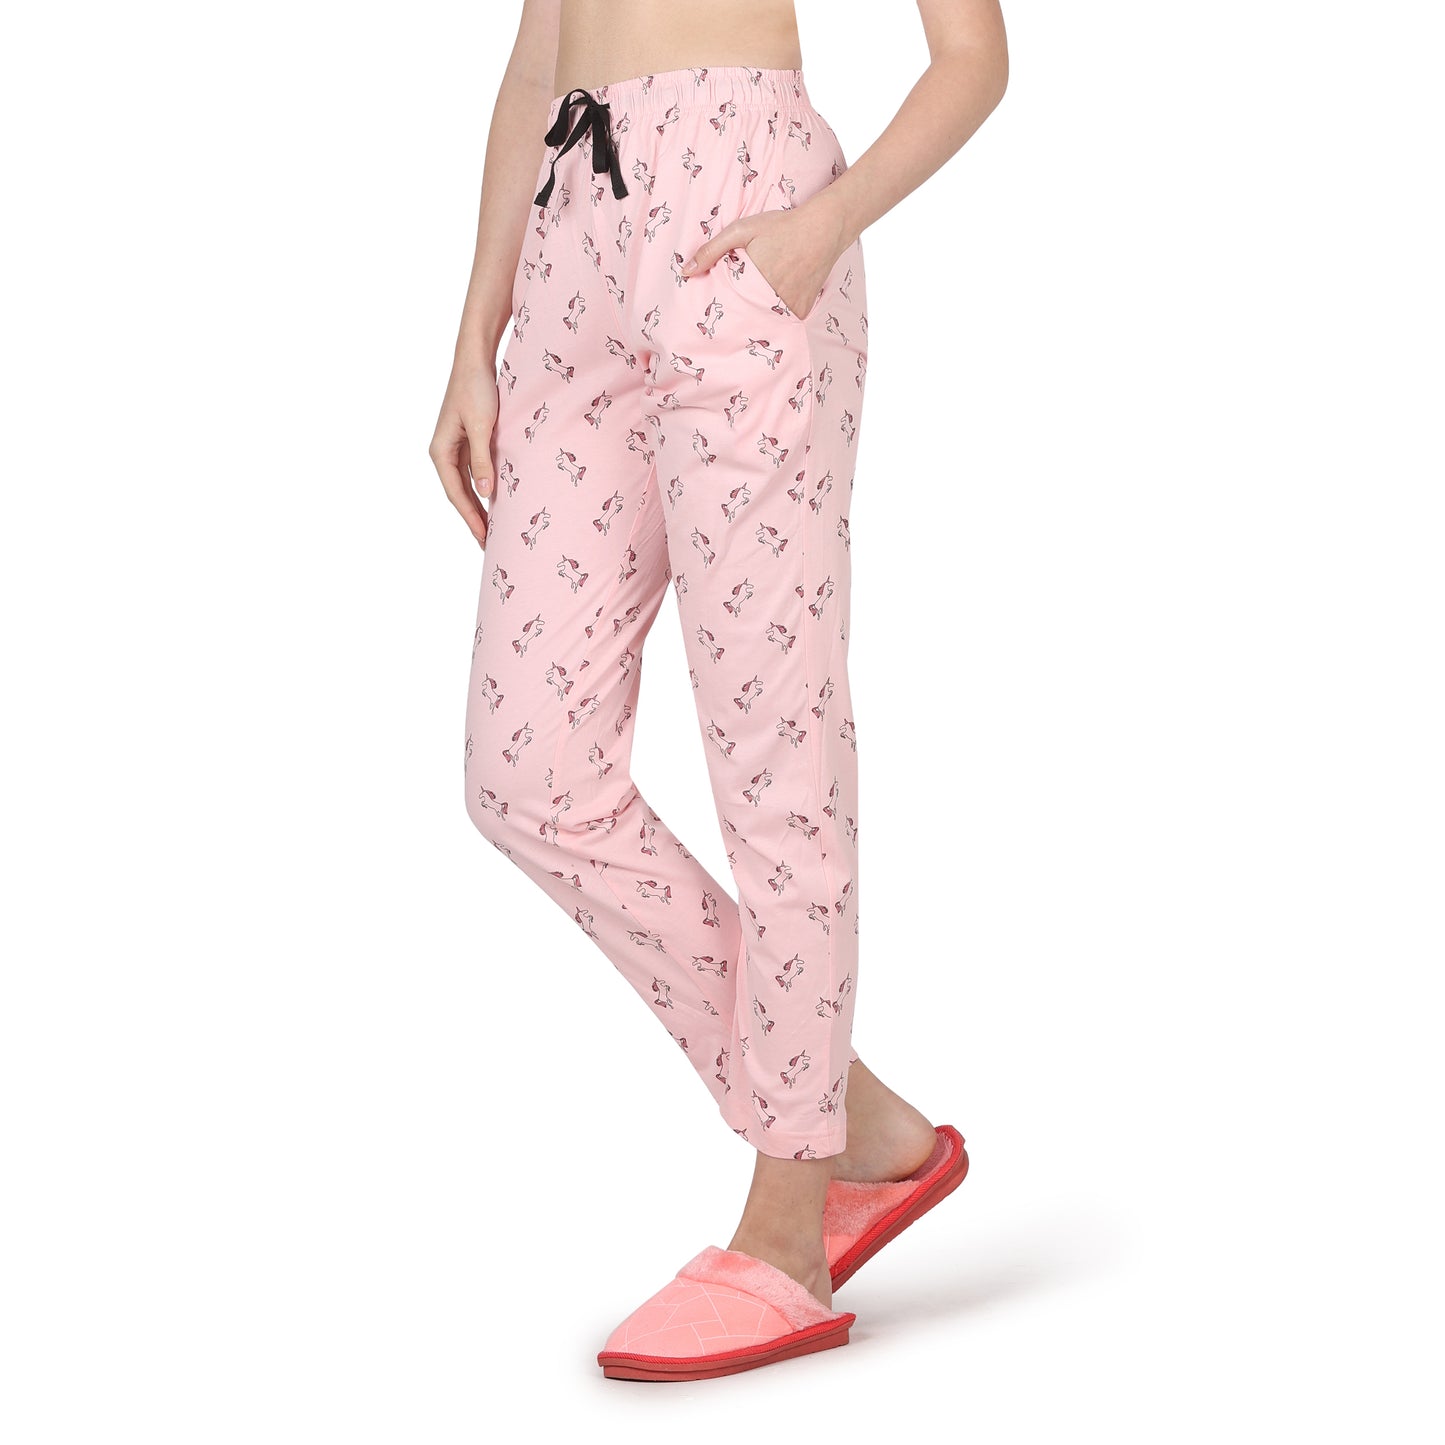 Eazy Women's Printed Lower - Pack of 4 - Black, Bright Red, Charcoal Grey & Light Pink